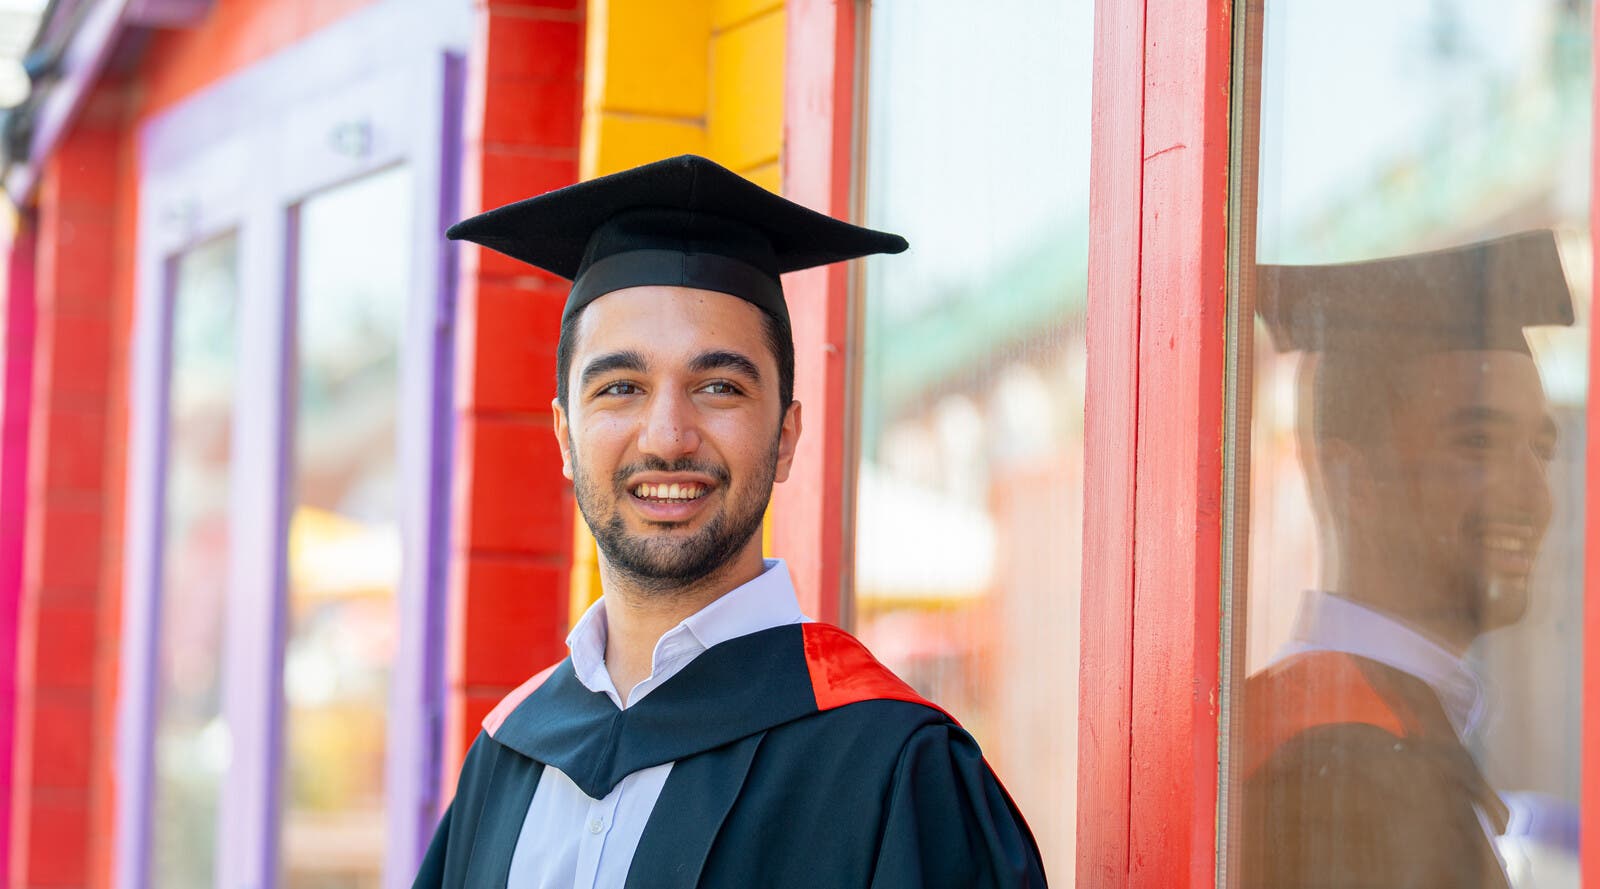 A student in graduation robes